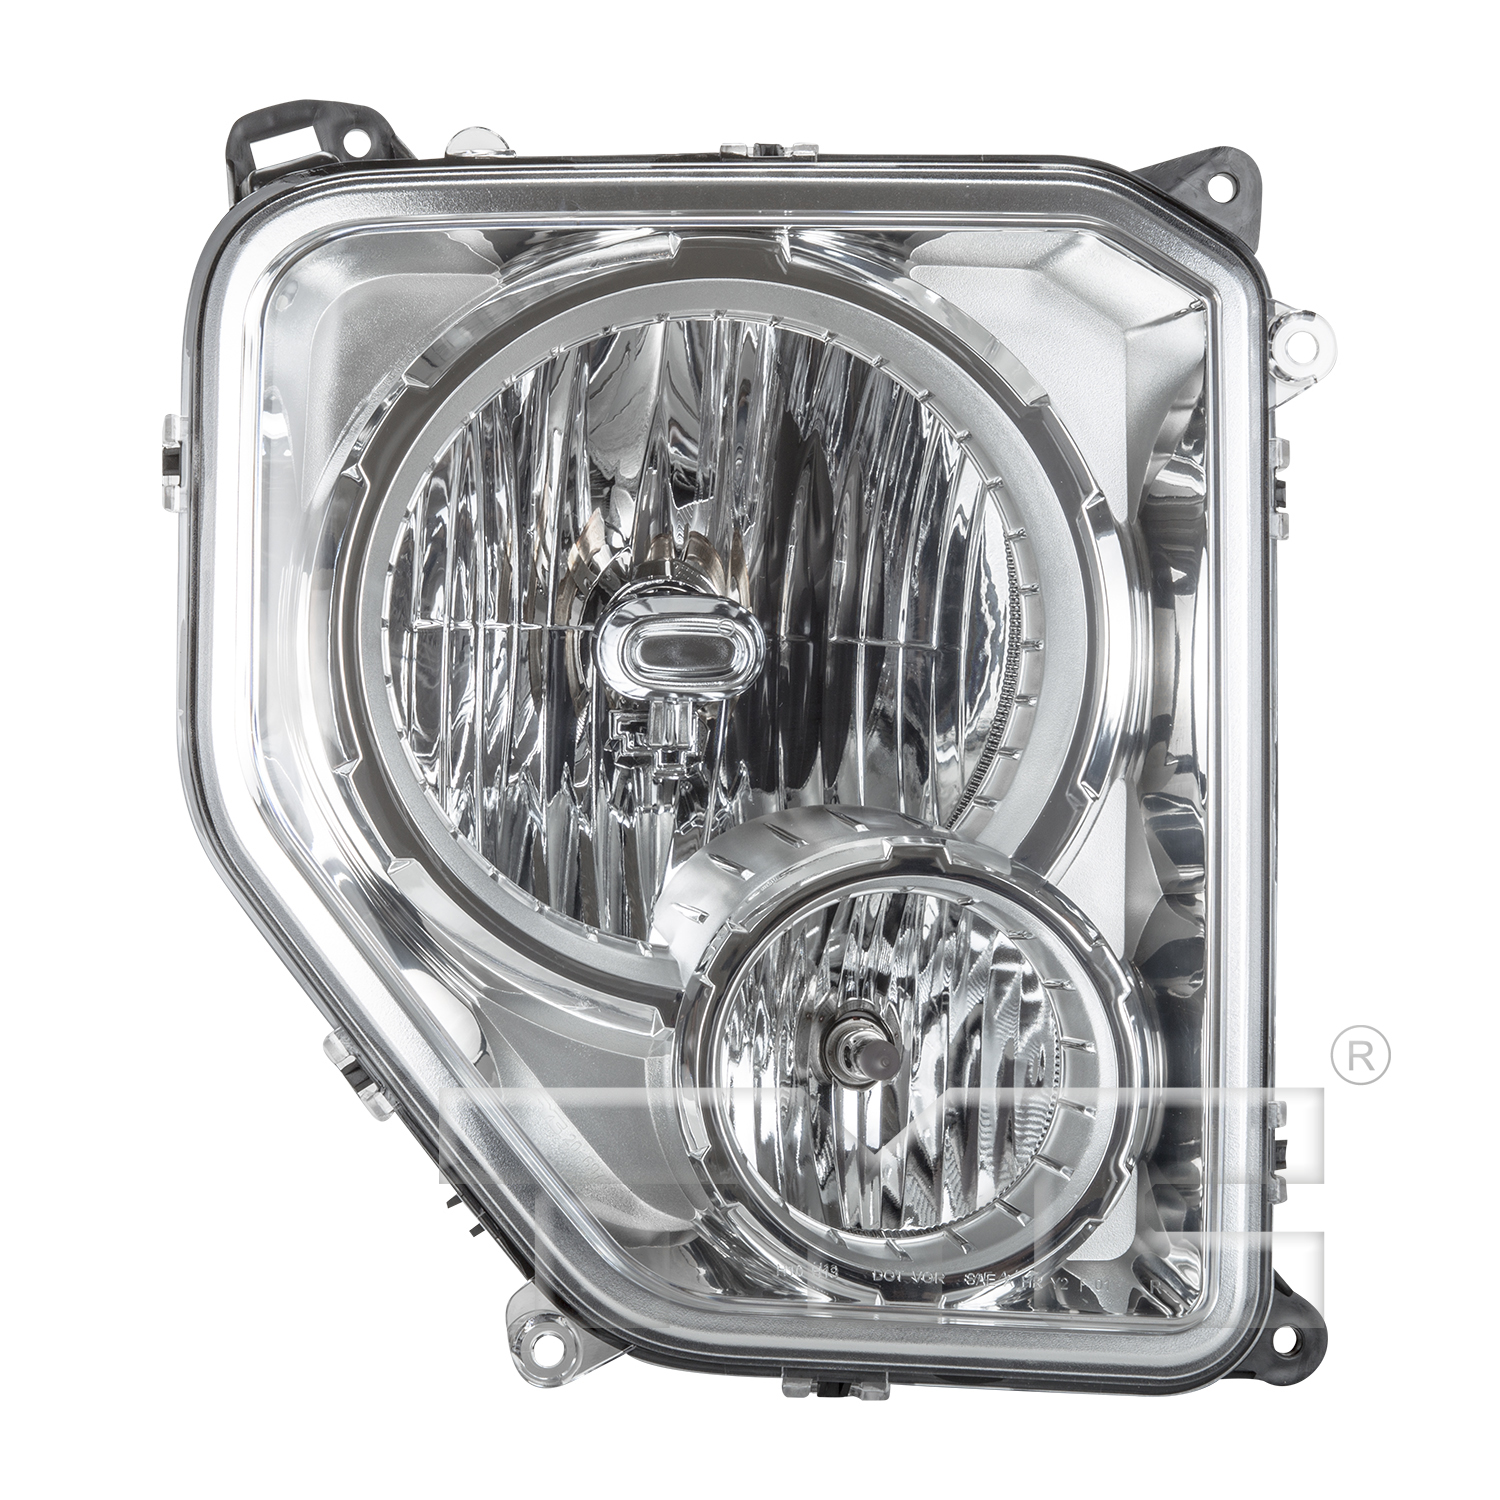 Aftermarket HEADLIGHTS for JEEP - LIBERTY, LIBERTY,08-12,RT Headlamp assy composite